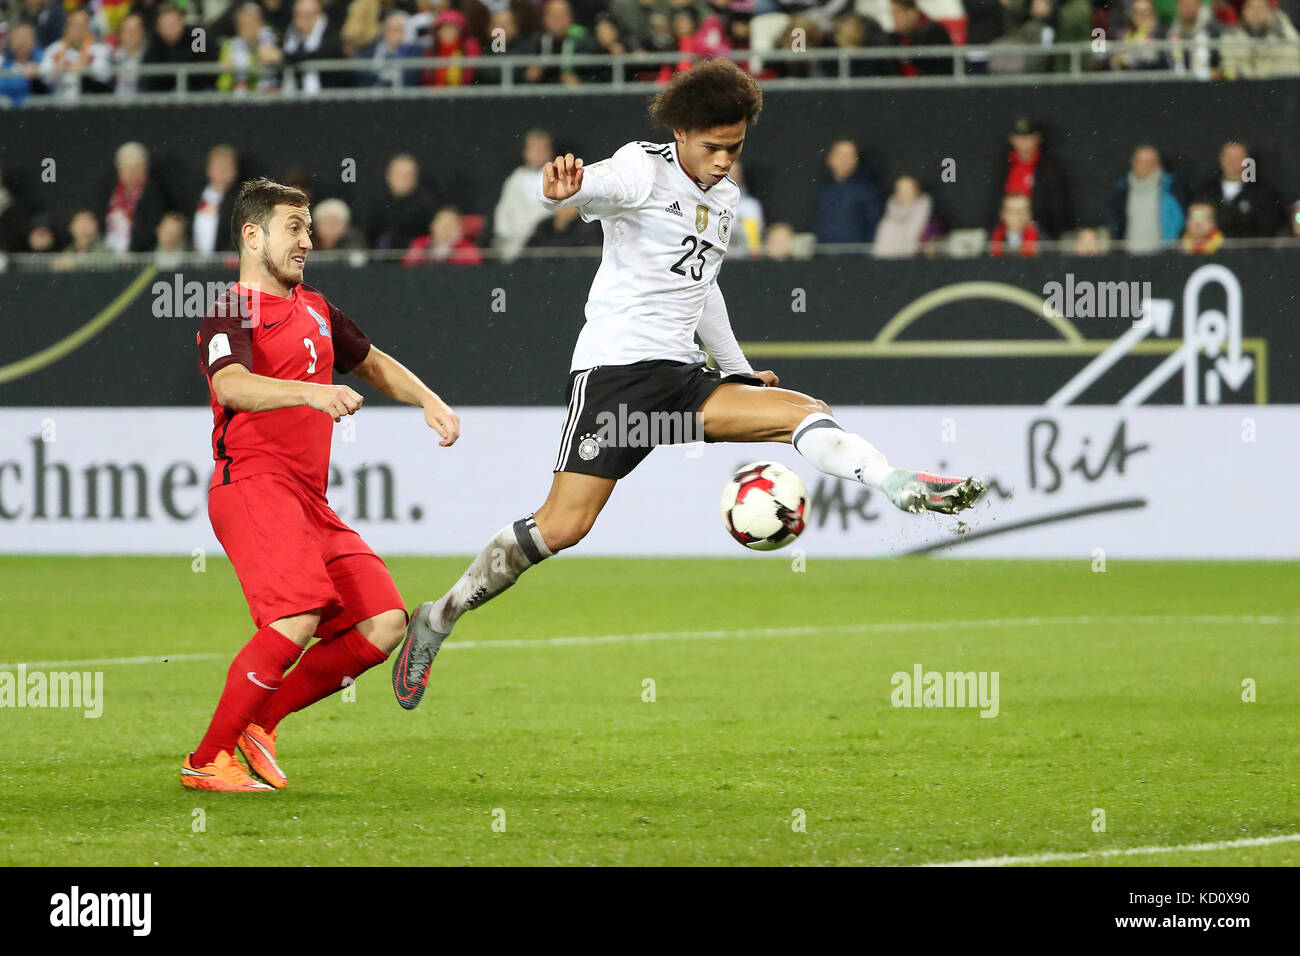 Kaiserslautern, Germany. 8th Oct, 2017. Leroy Sane (R) of Germany shoots during the FIFA 2018 World Cup Qualifiers Group C match between Germany and Azerbaijan at Fritz Walter Stadium in Kaiserslautern, Germany, on Oct. 8, 2017. Germany won 5-1. Credit: Ulrich Hufnagel/Xinhua/Alamy Live News Stock Photo